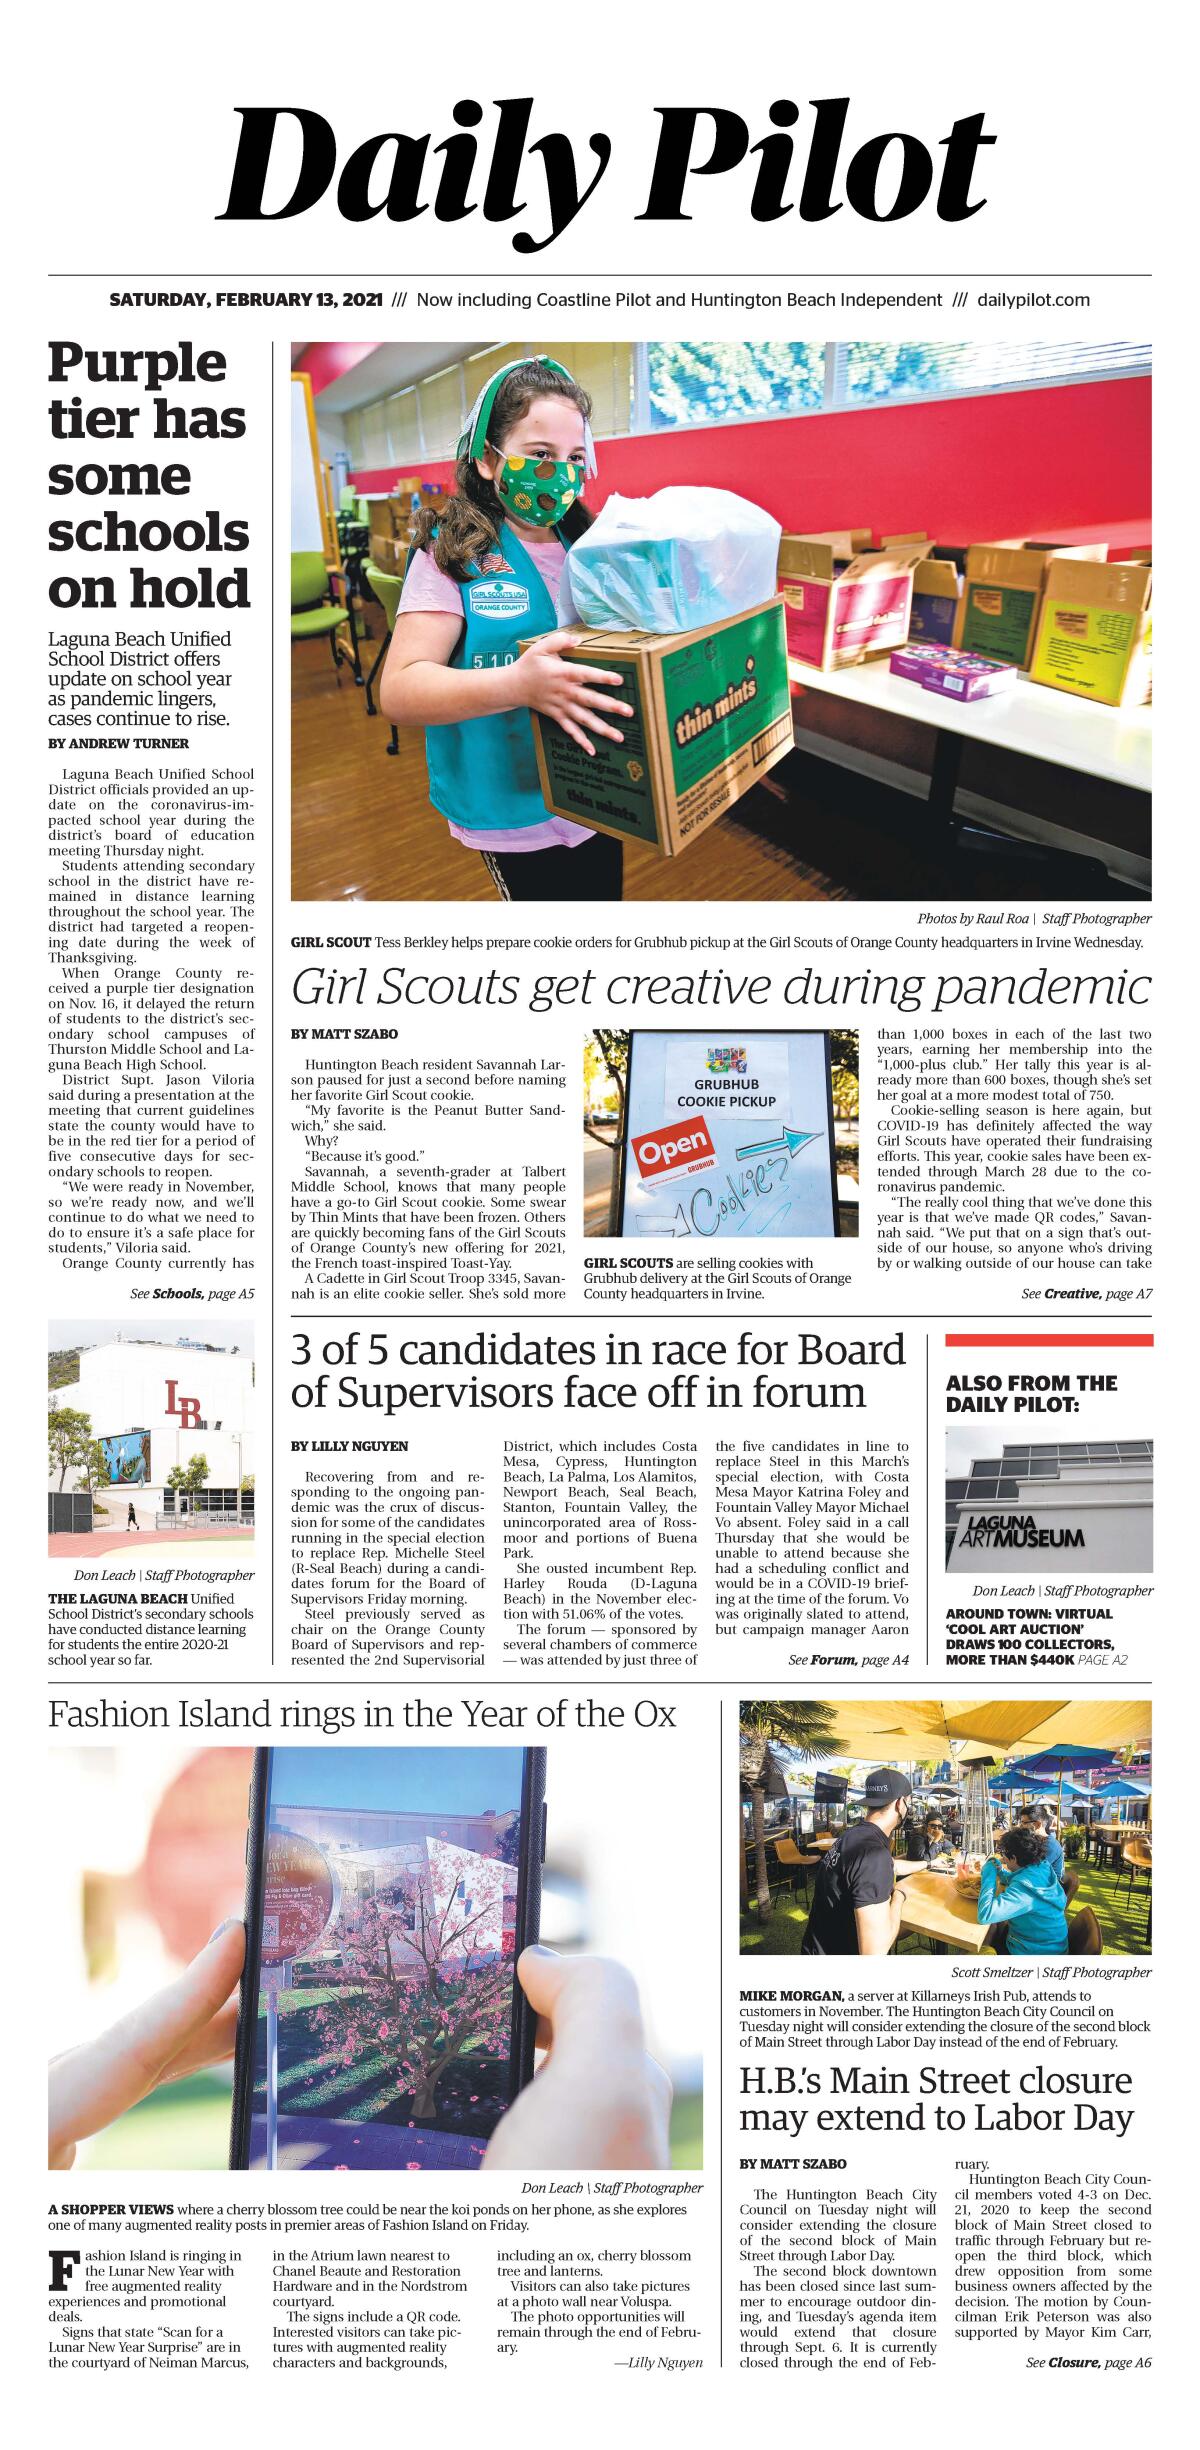 Front page of Daily Pilot e-newspaper for Saturday, Feb. 13, 2021.